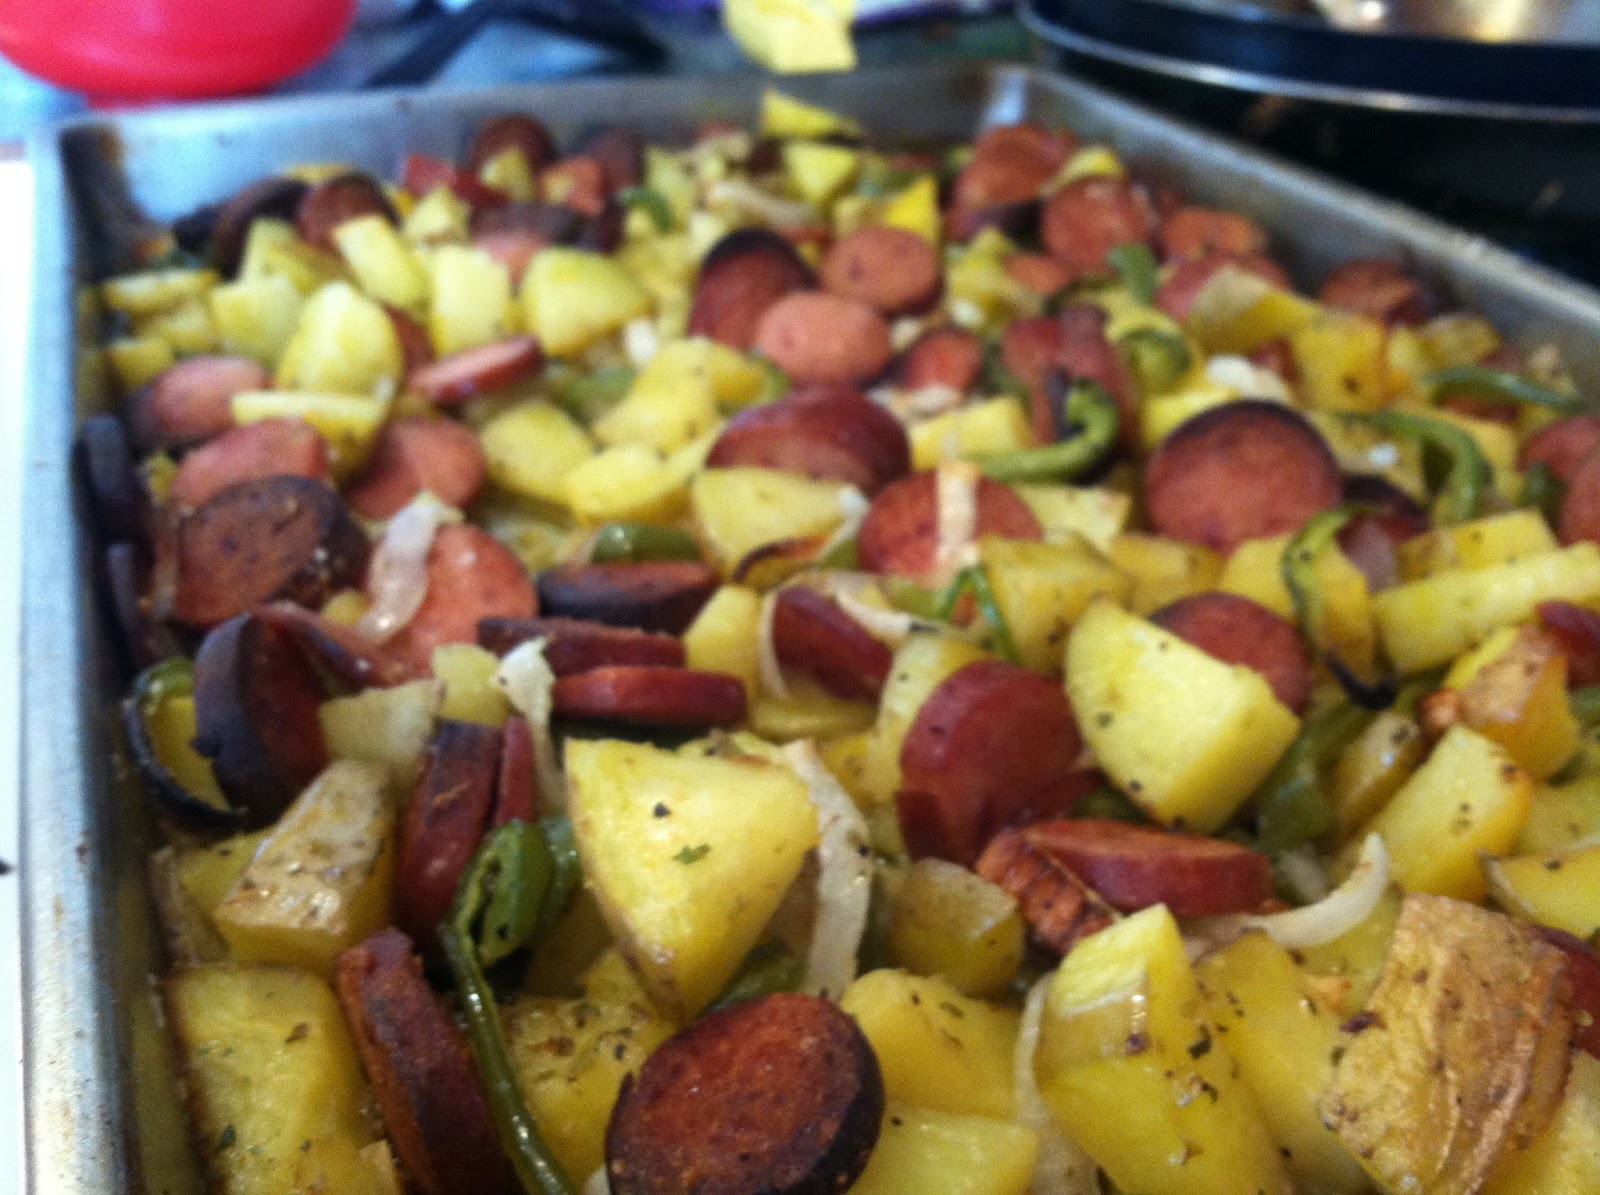 The Fiery Redhead: Roasted potatoes and sausage.